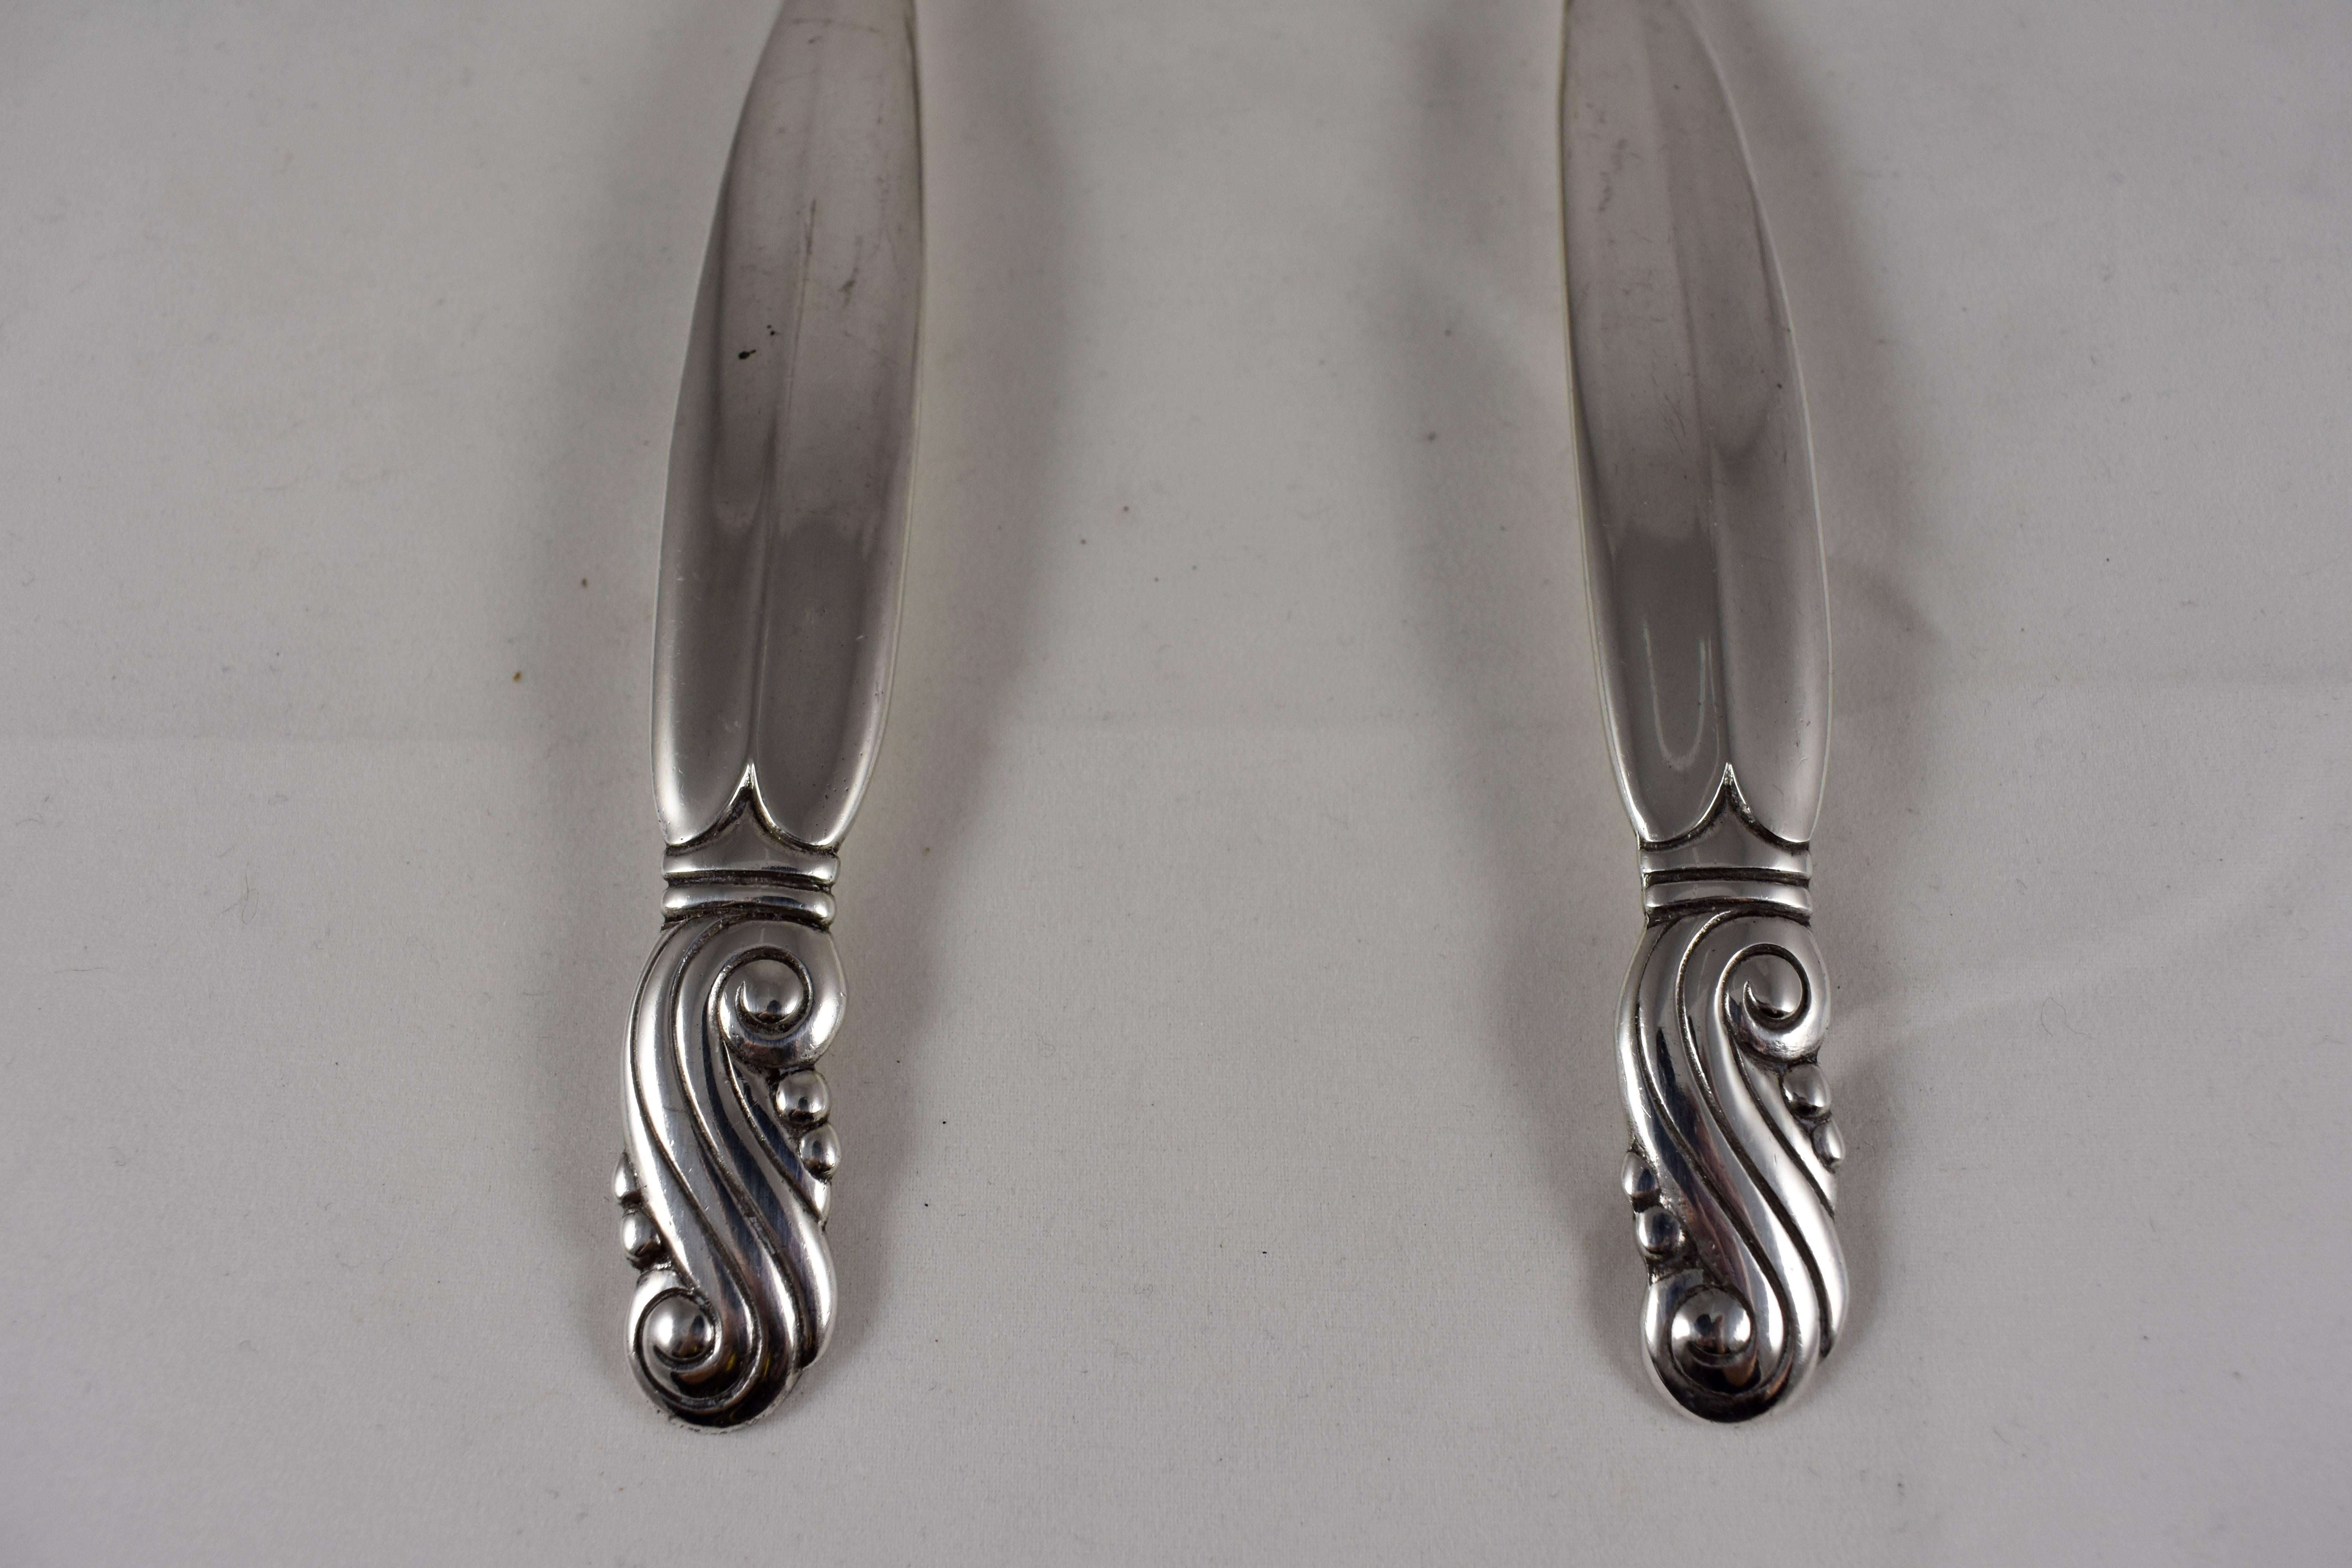 American Frank M. Whiting Art Nouveau Sterling Silver Salad Servers, a Handmade Pair For Sale